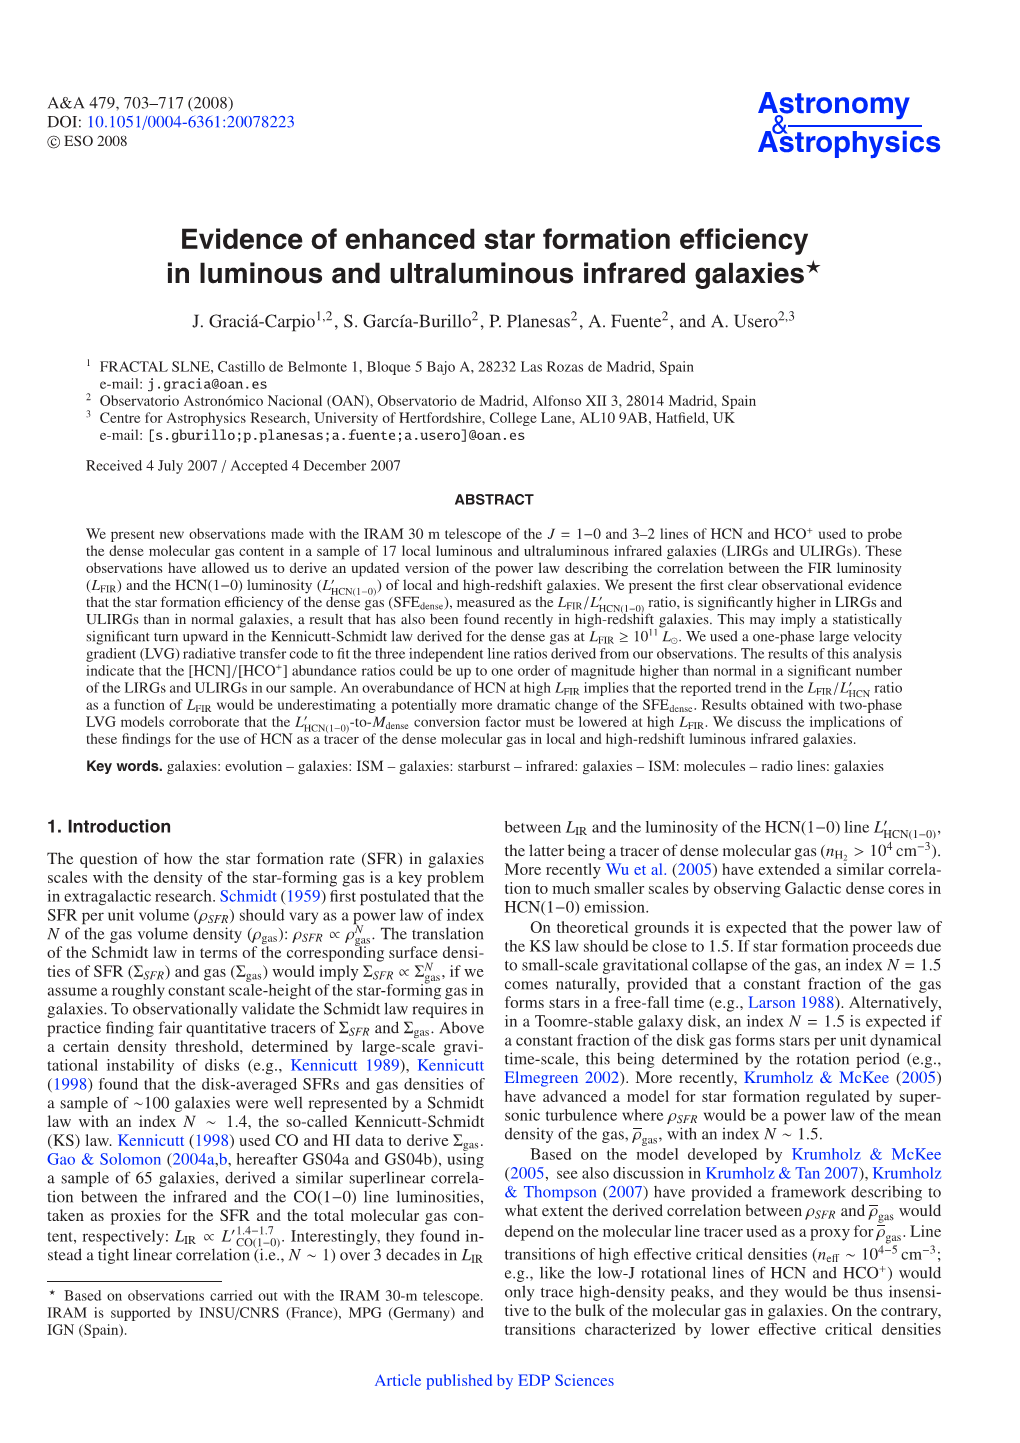 Evidence of Enhanced Star Formation Efficiency in Luminous And